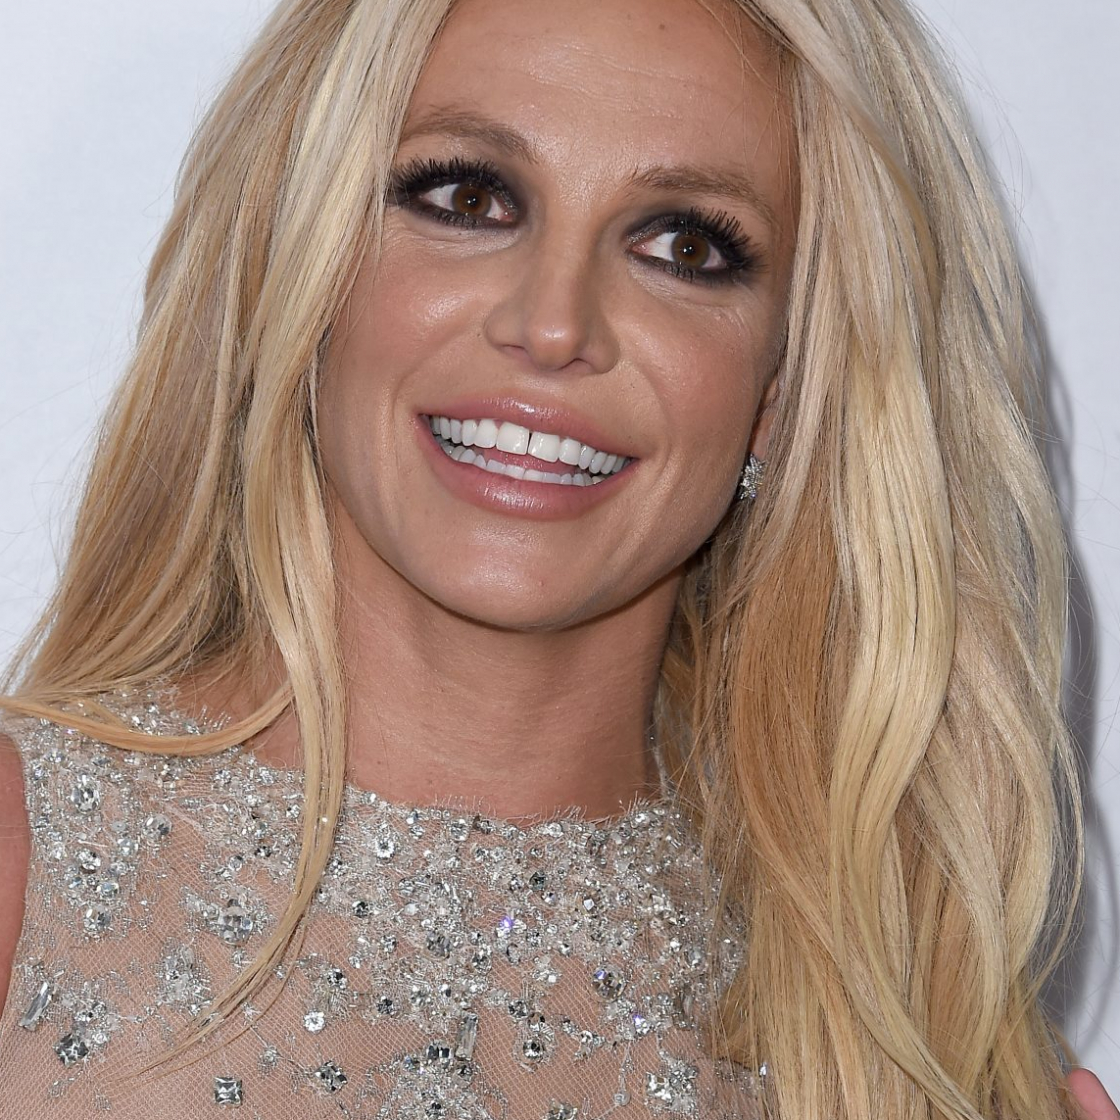 1120px x 1120px - The shocking reaction to Britney's holiday photos shows misogyny is alive  and kicking